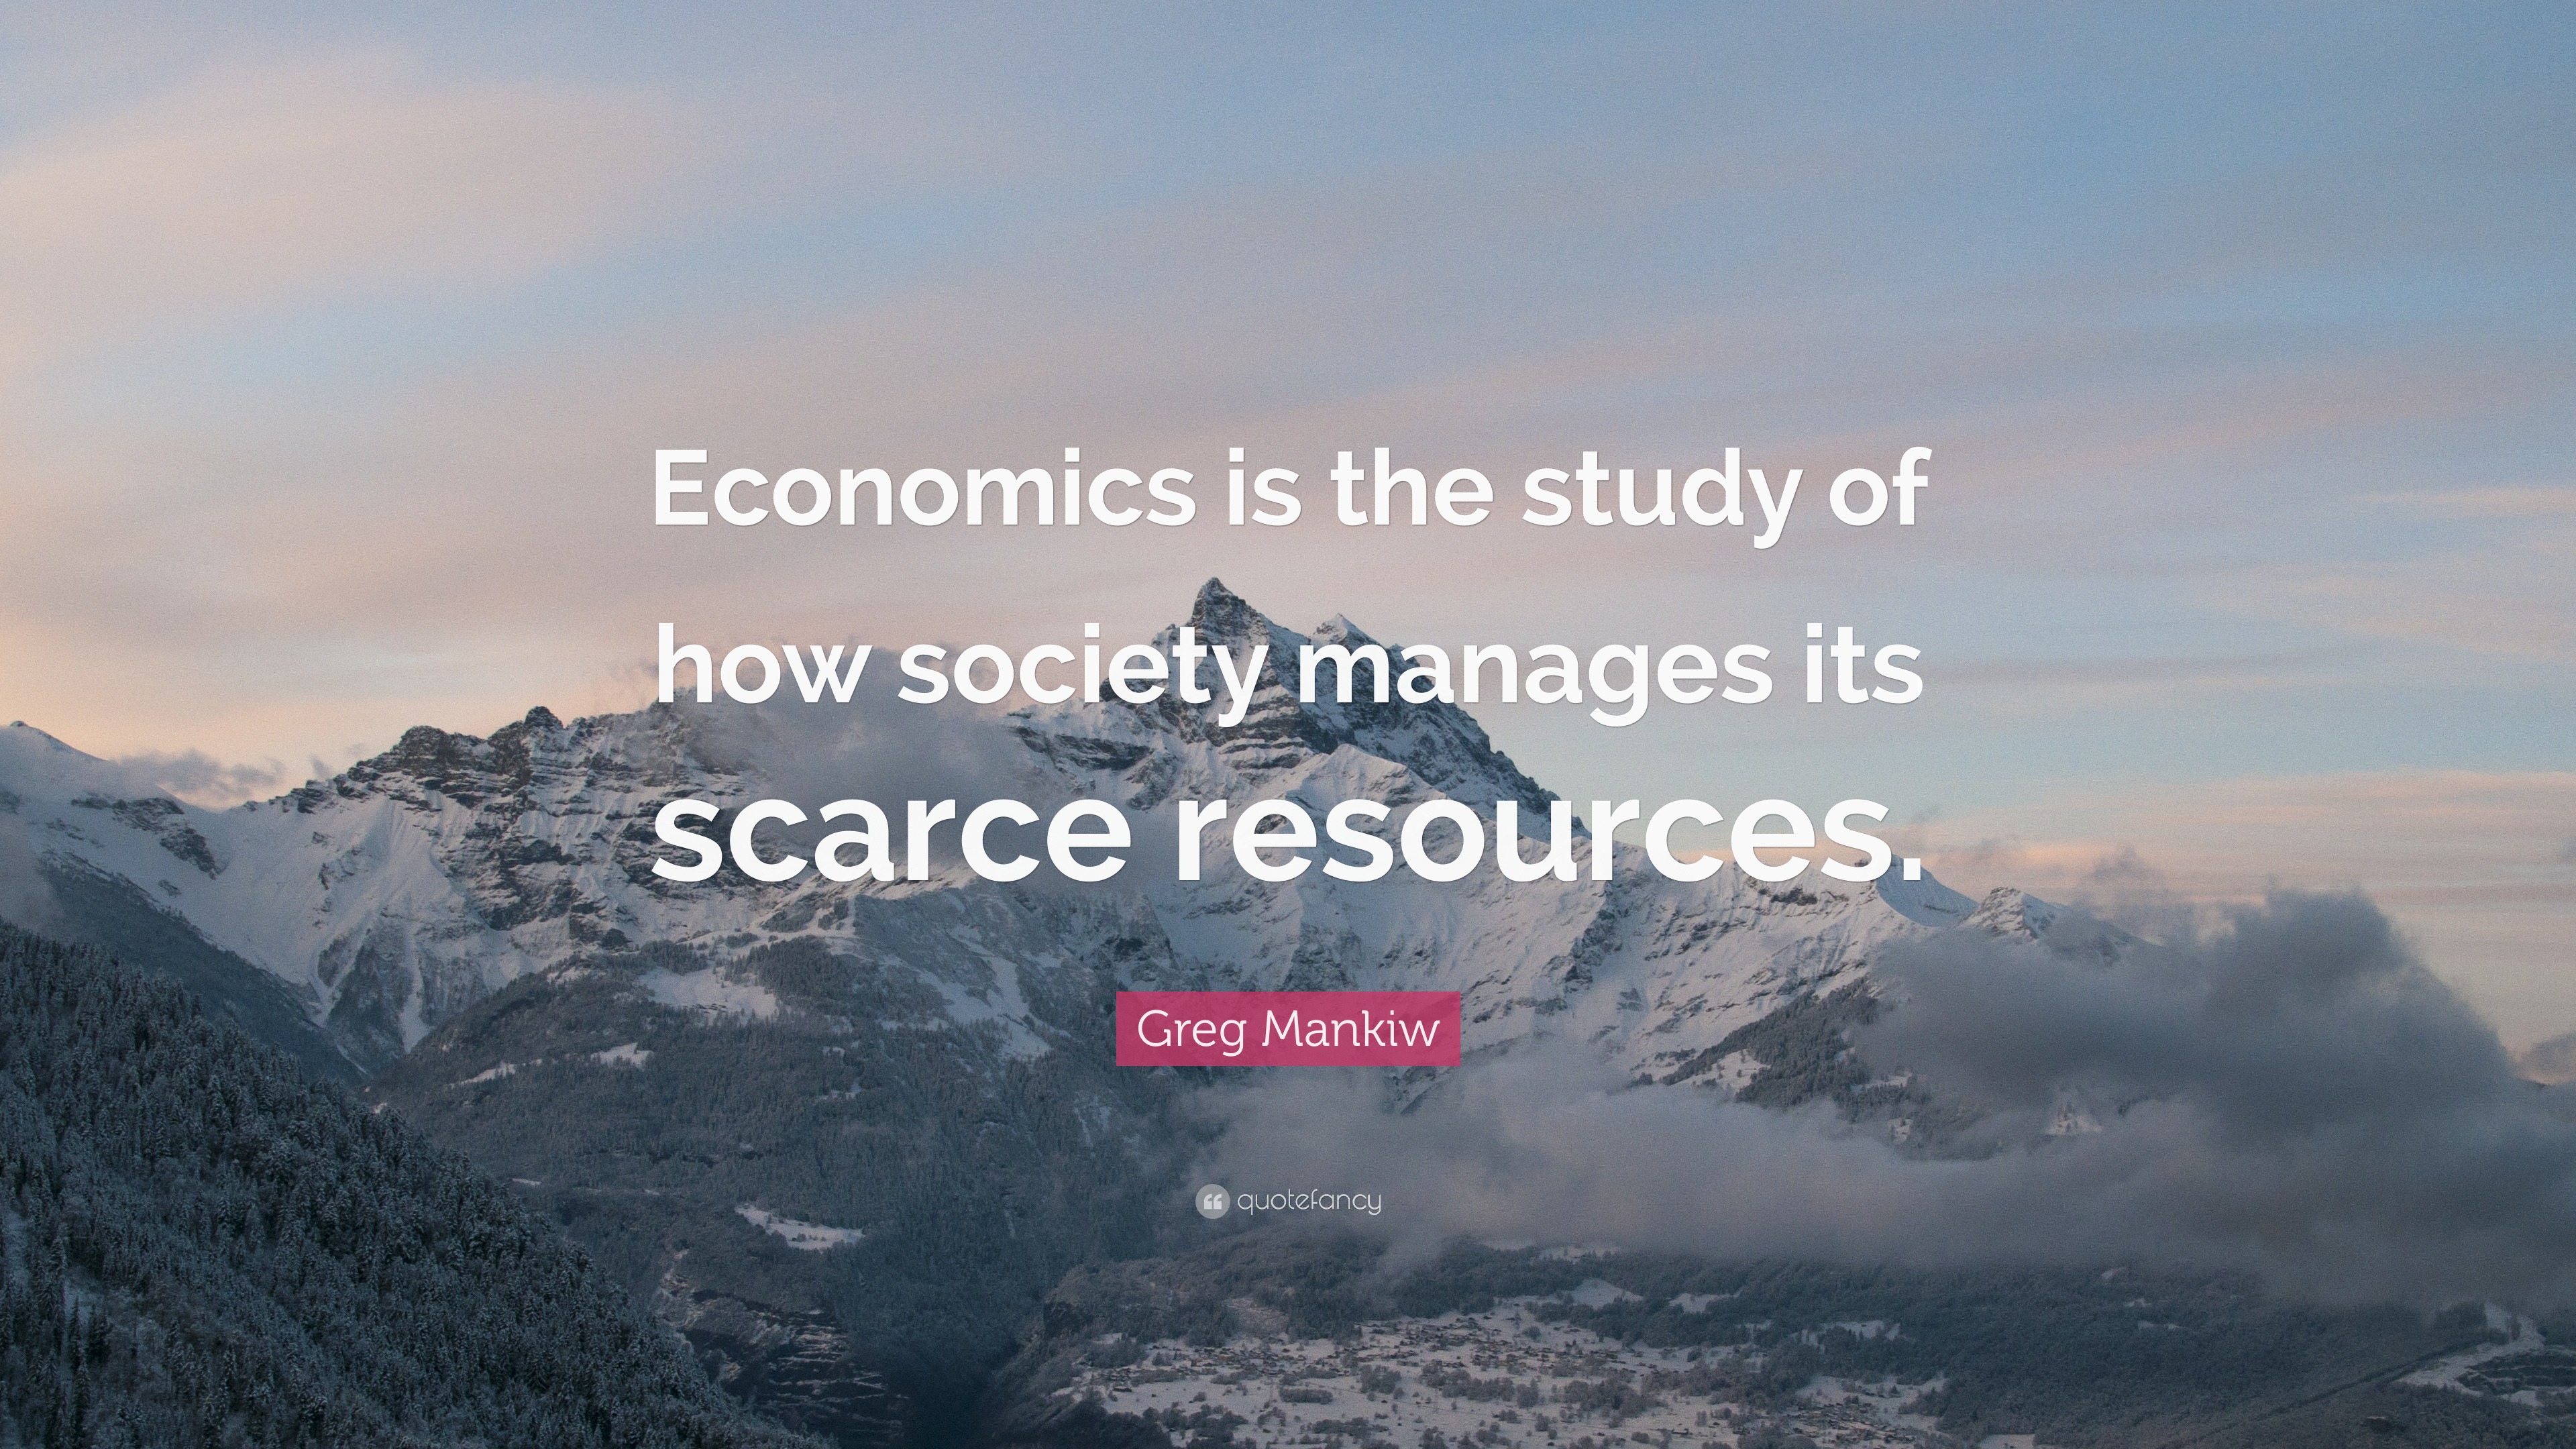 Greg Mankiw Quote “Economics is the study of how society manages its